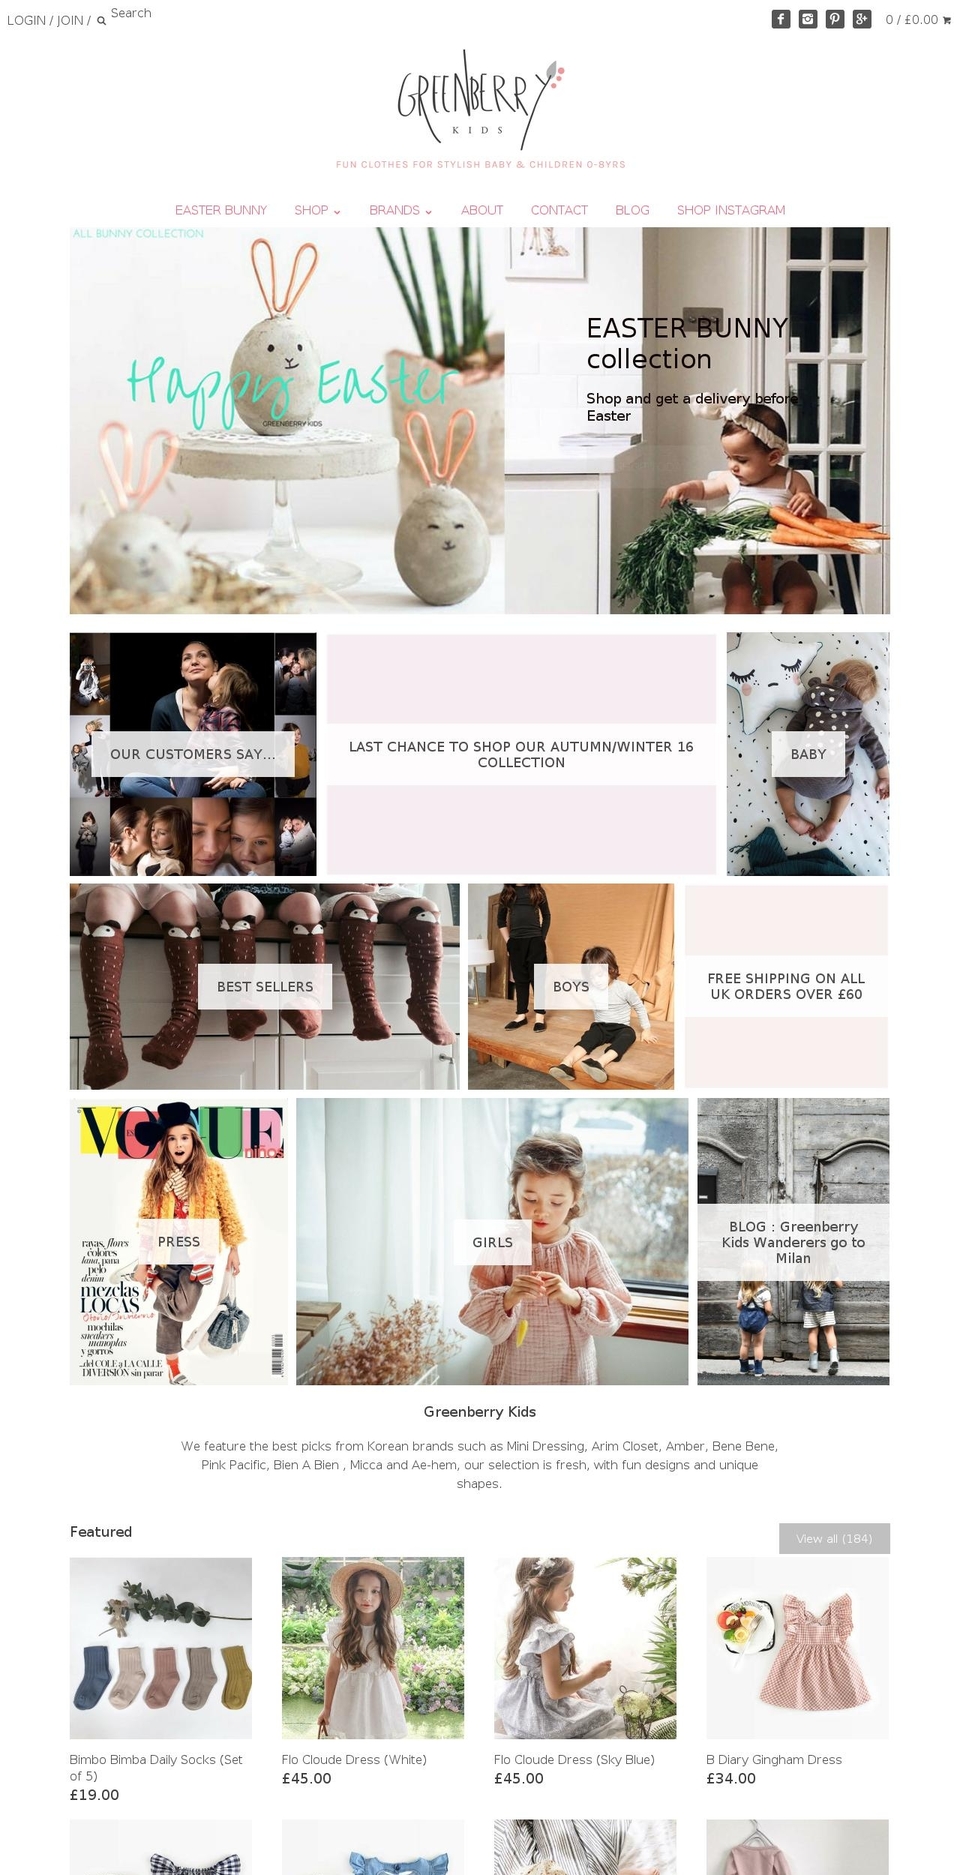 Focal Shopify theme site example greenberrykids.com